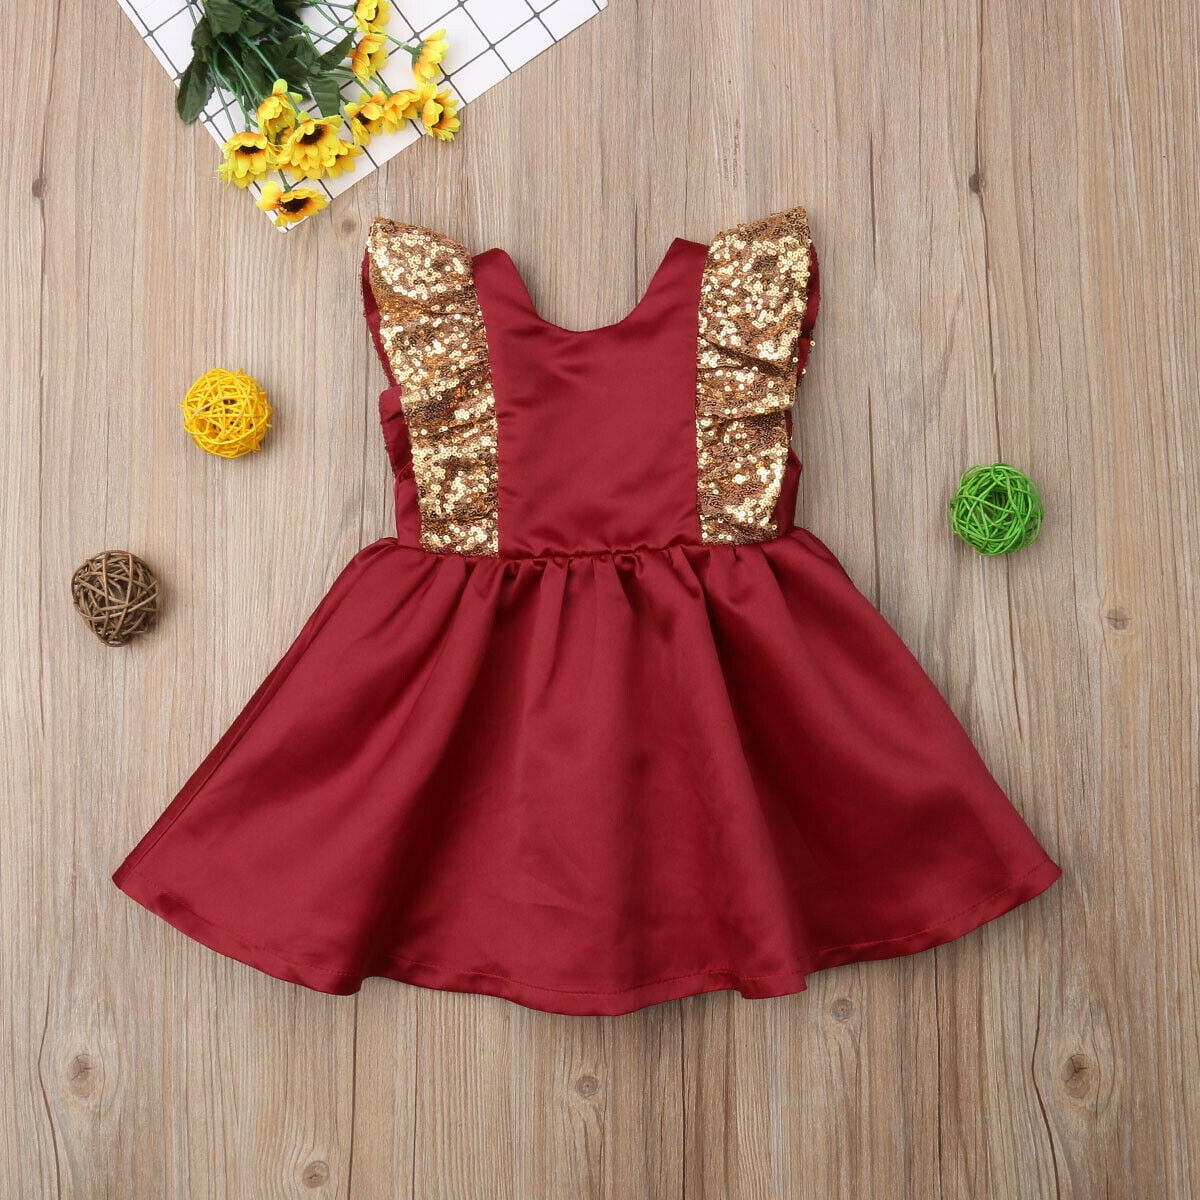 AIMJCHLD 6M-5T Baby Girls Backless Pageant Wedding Party Sequins Bowknot Flower Dresses